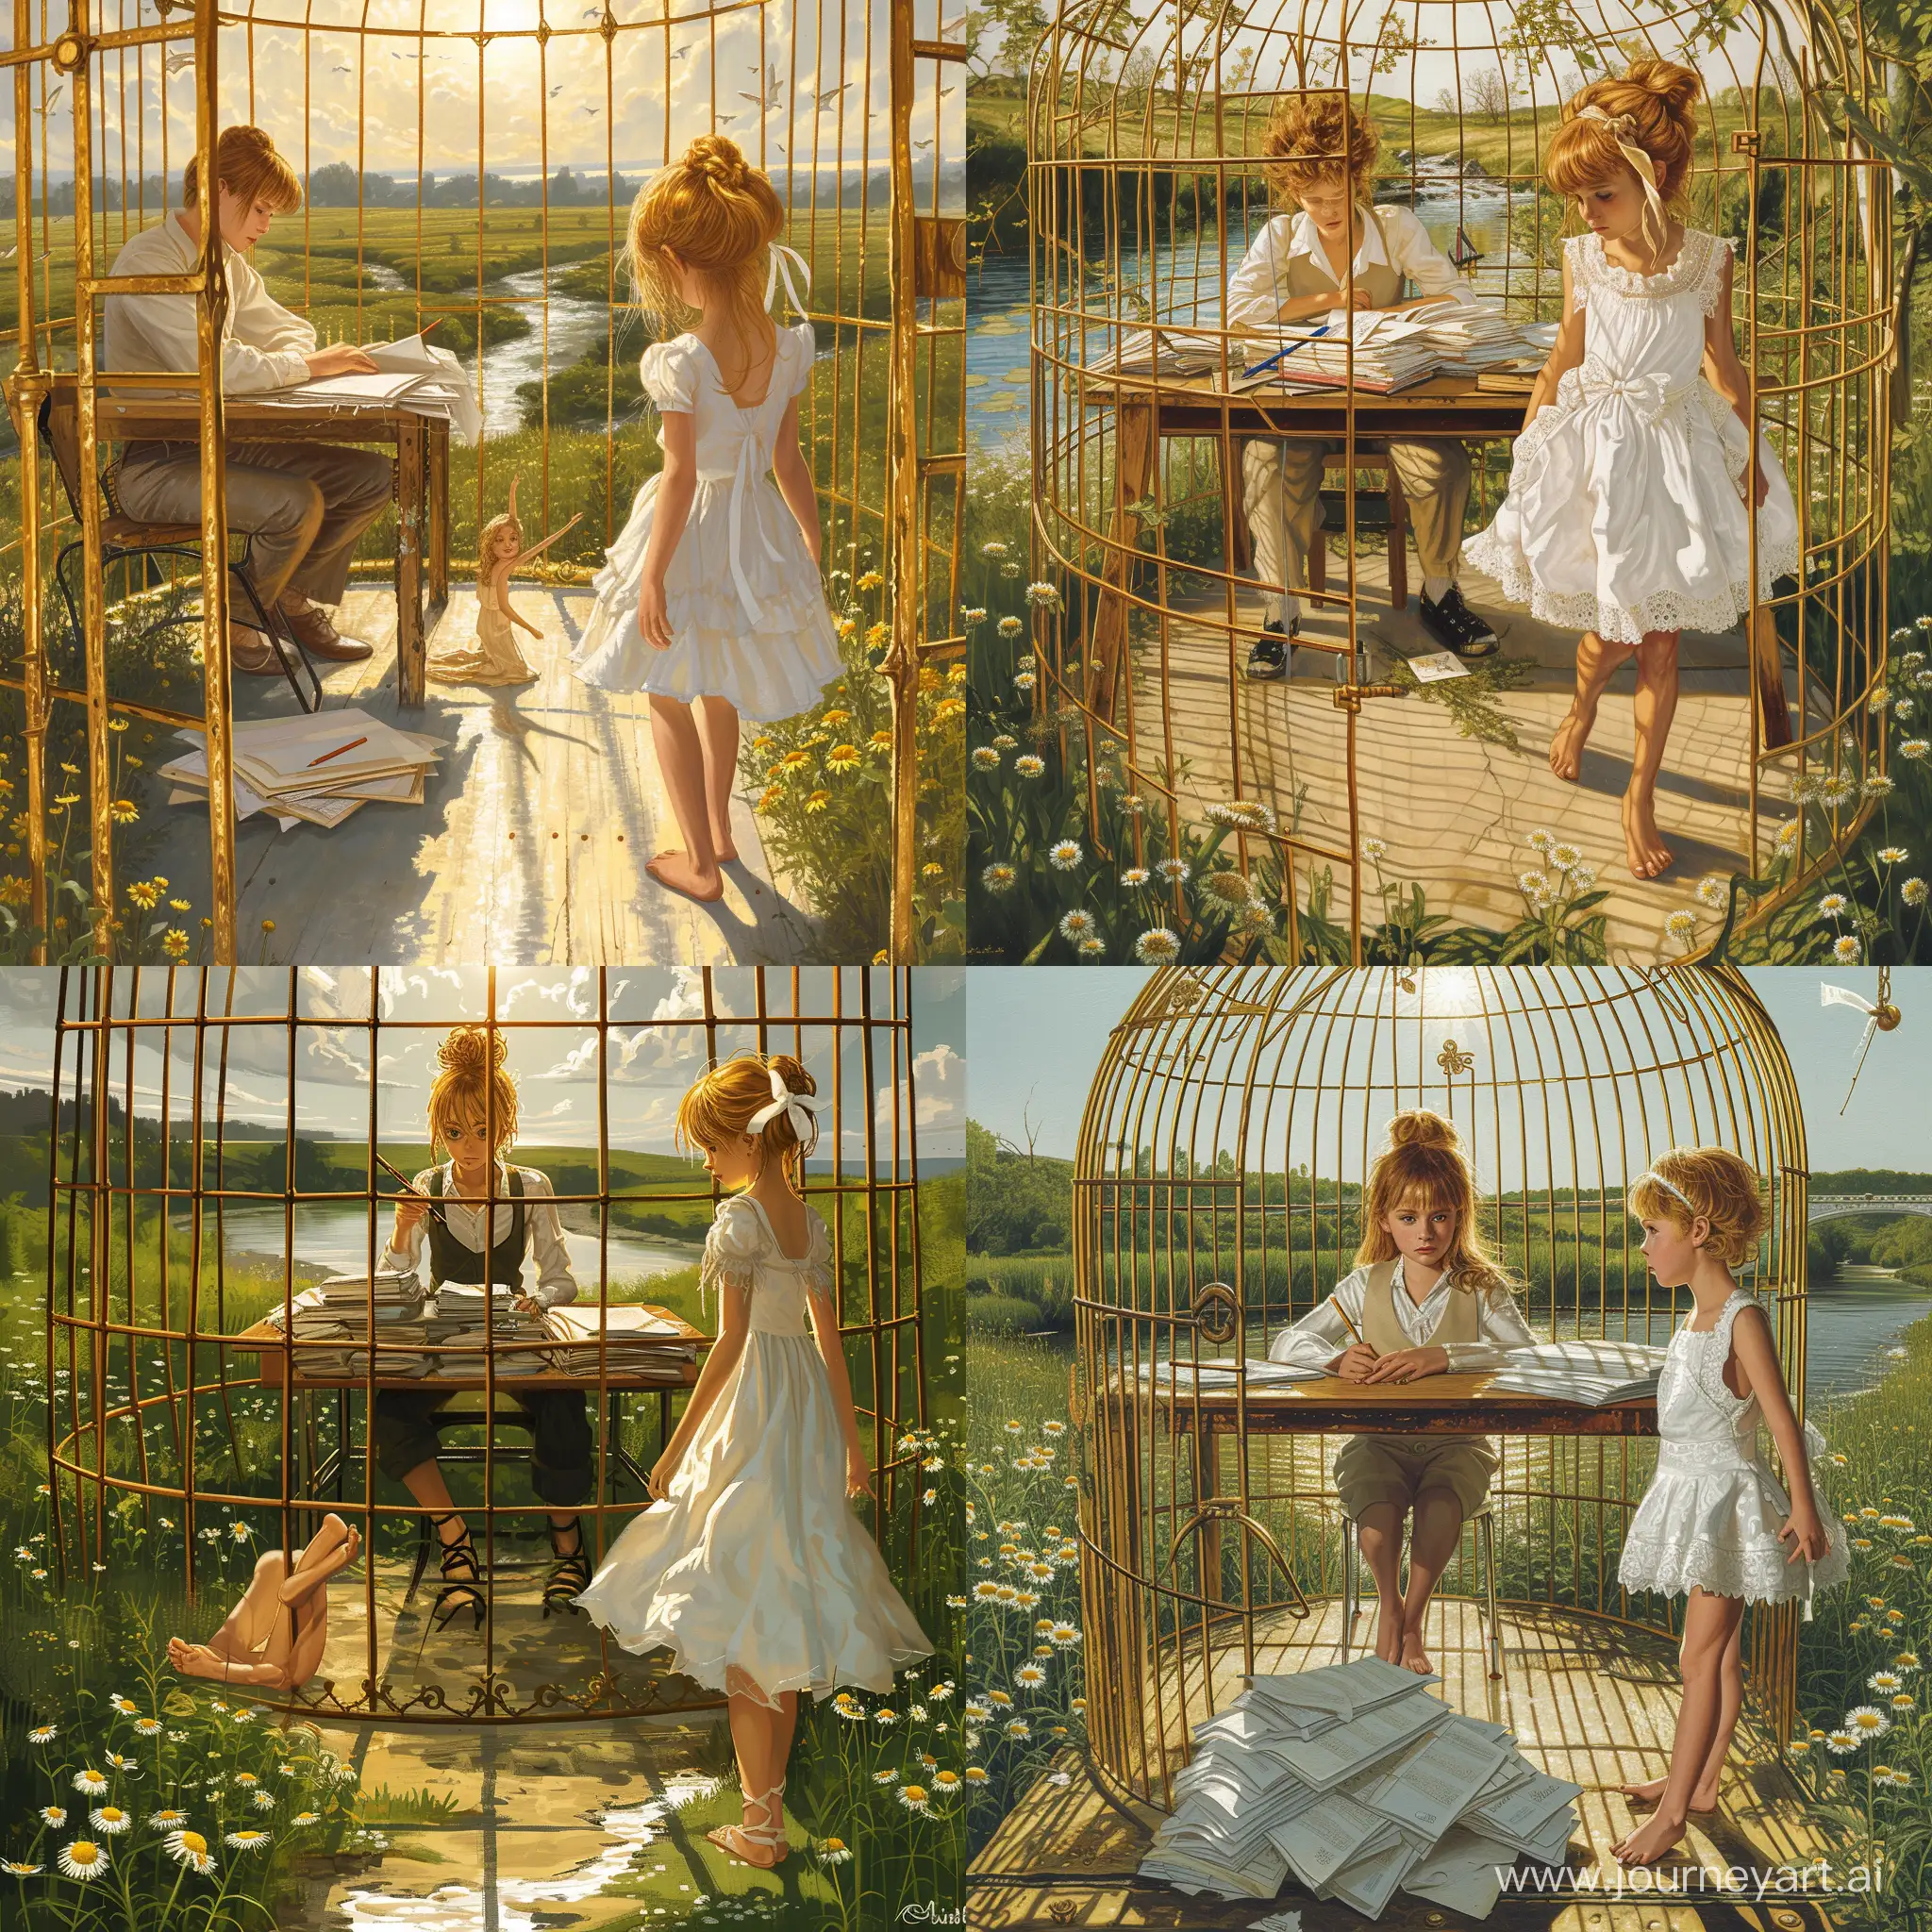 Golden-Cage-Scene-Two-Girls-Amidst-Nature-and-Work